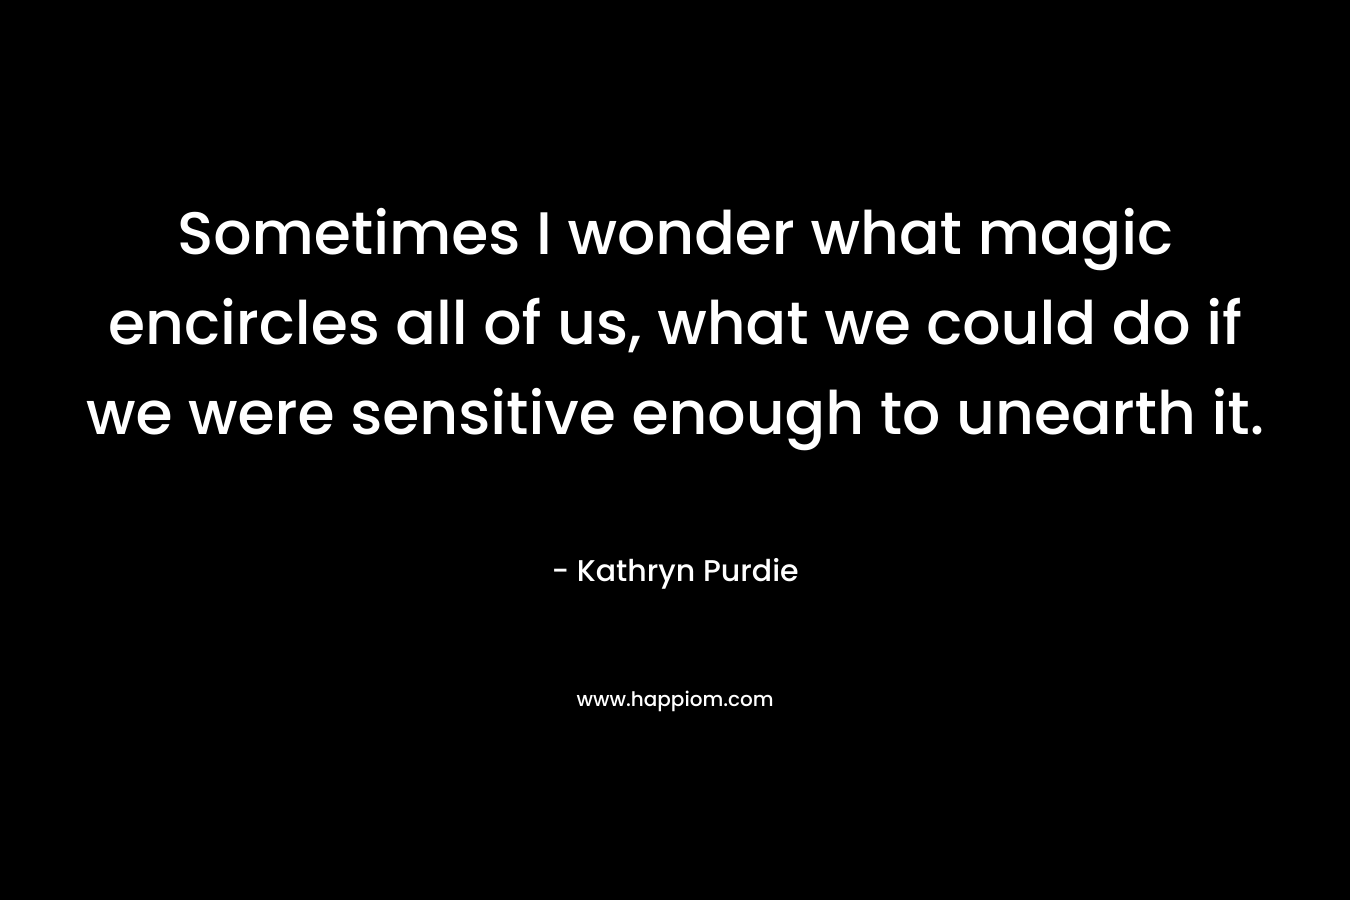 Sometimes I wonder what magic encircles all of us, what we could do if we were sensitive enough to unearth it. – Kathryn Purdie